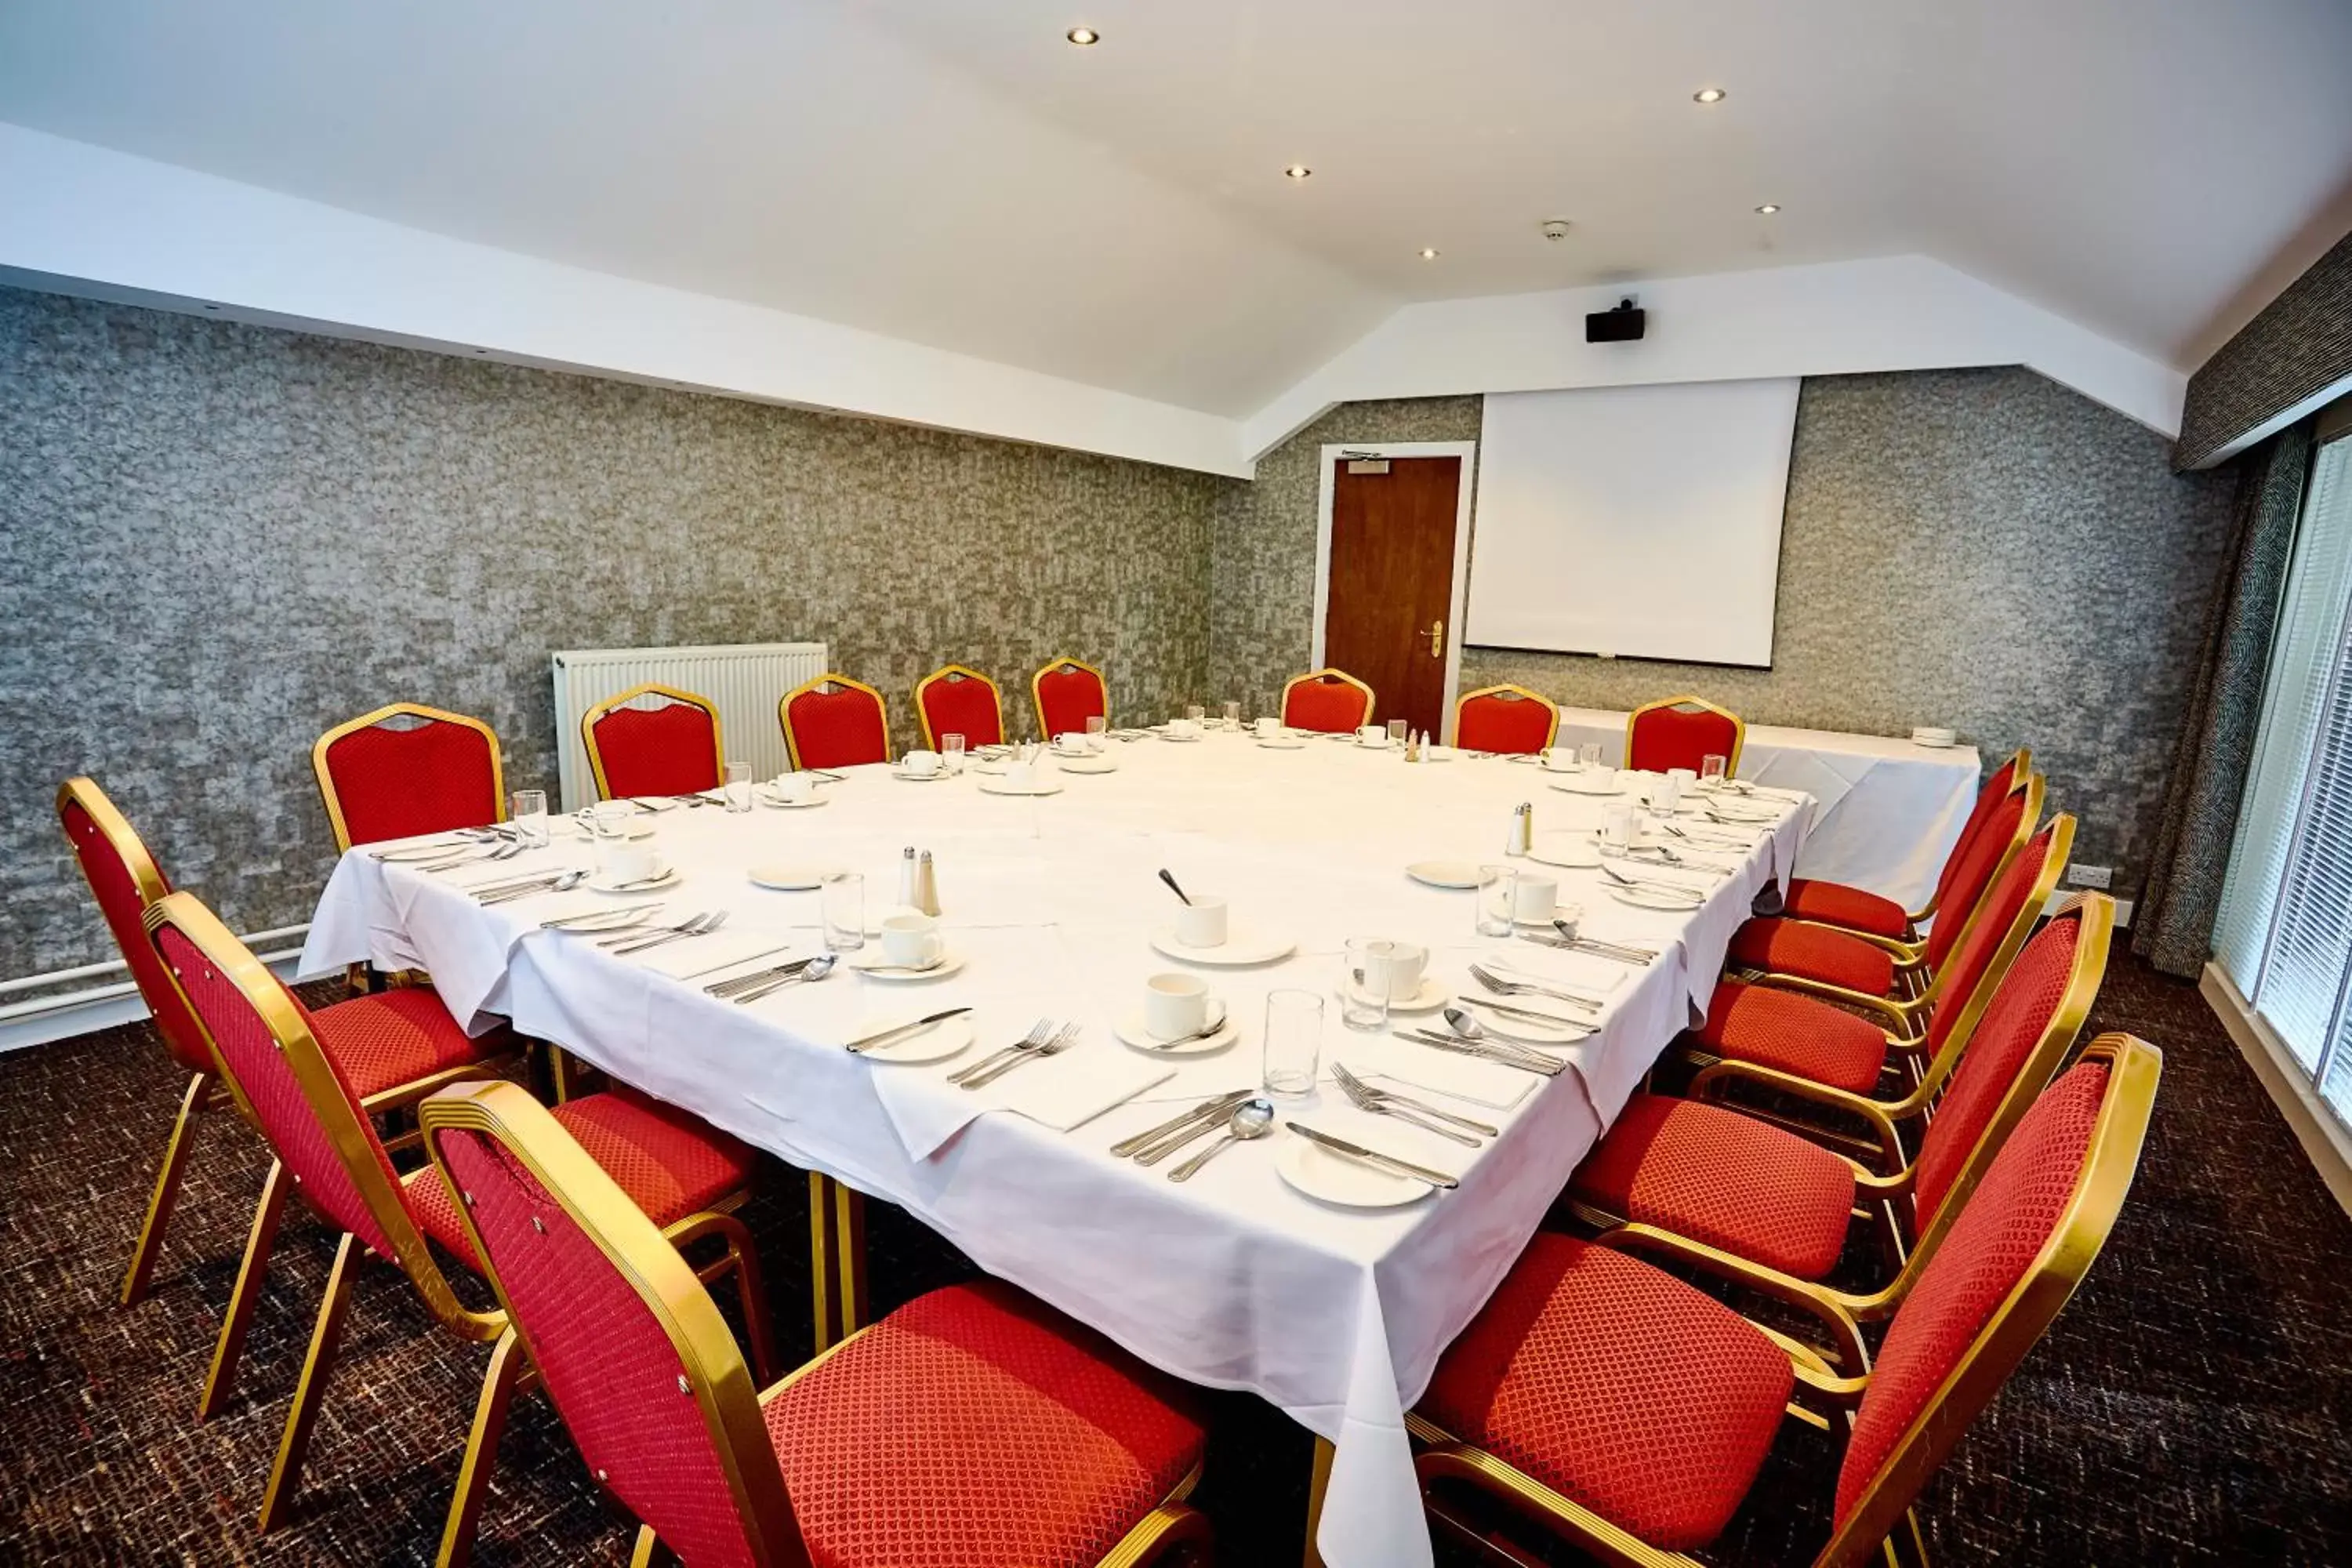 Banquet/Function facilities, Banquet Facilities in Abbotsford Hotel